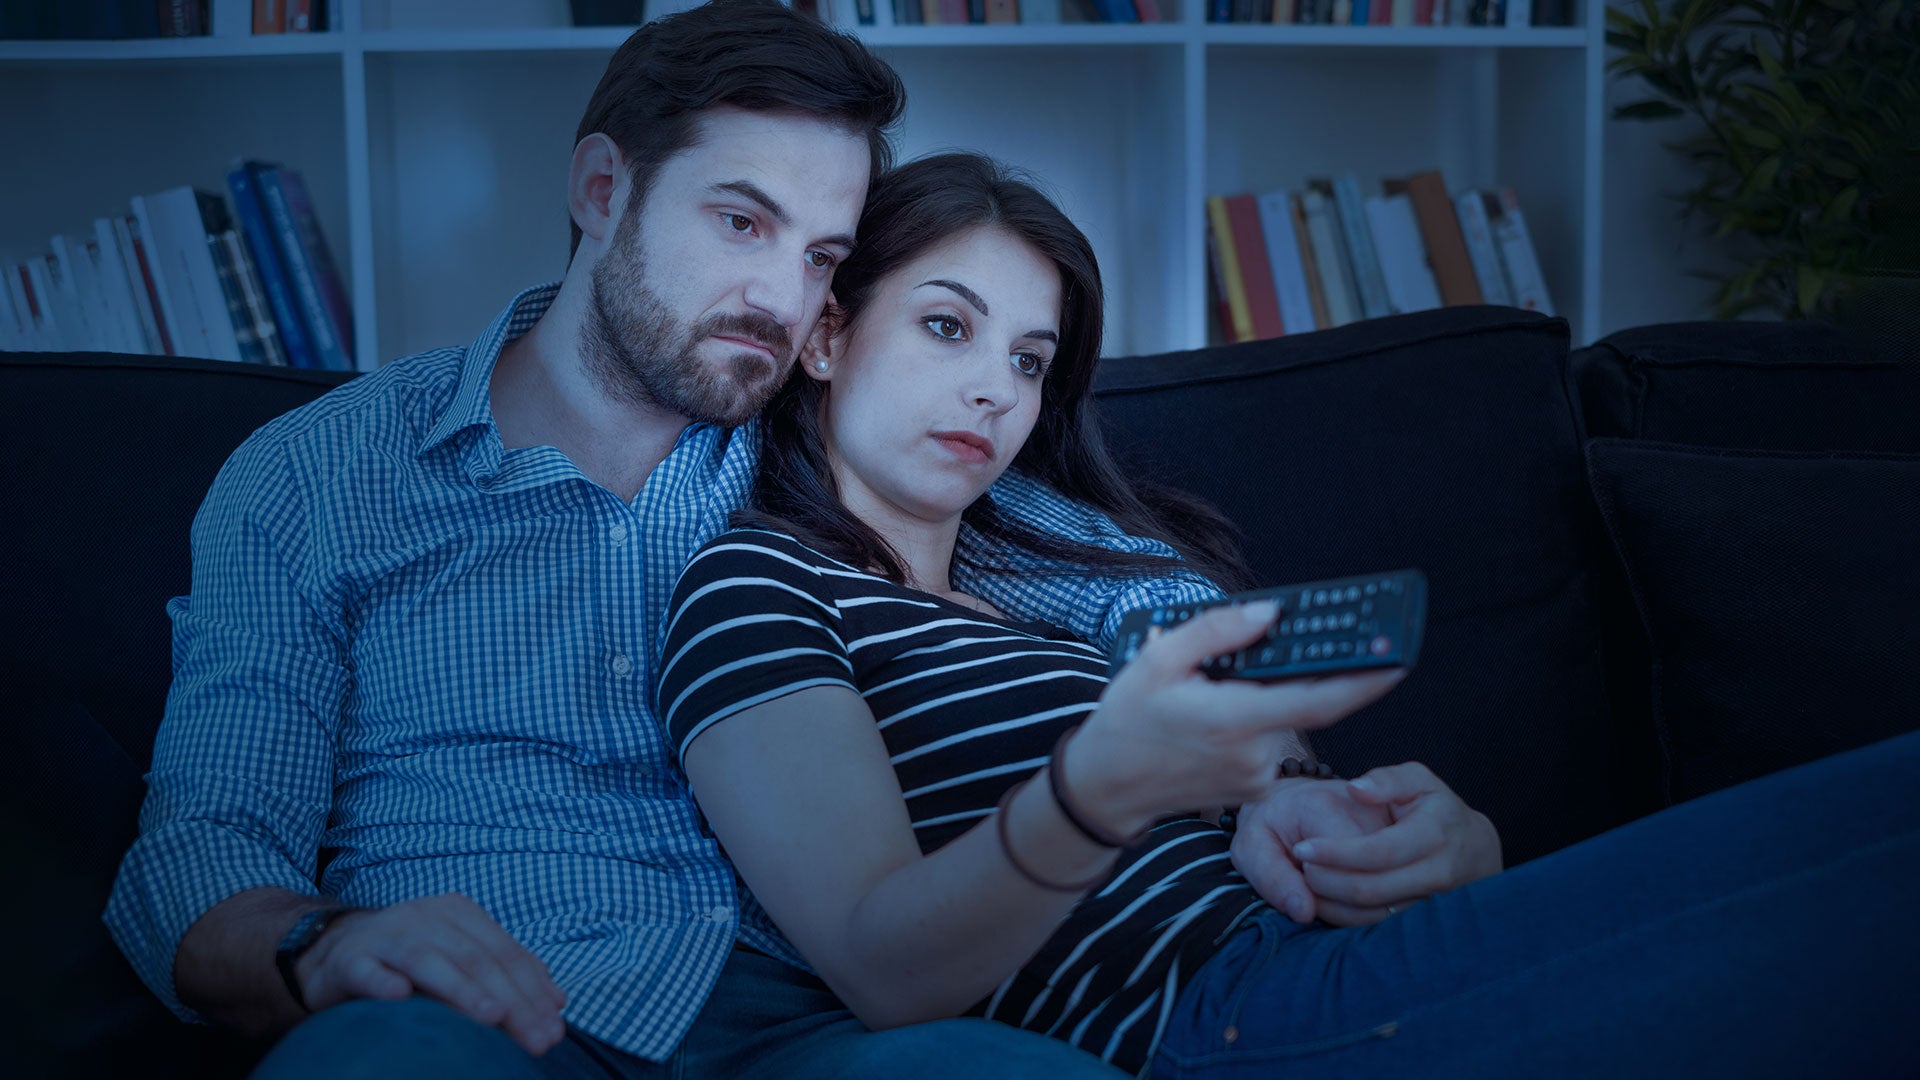 Do Couples Watch Porn Together